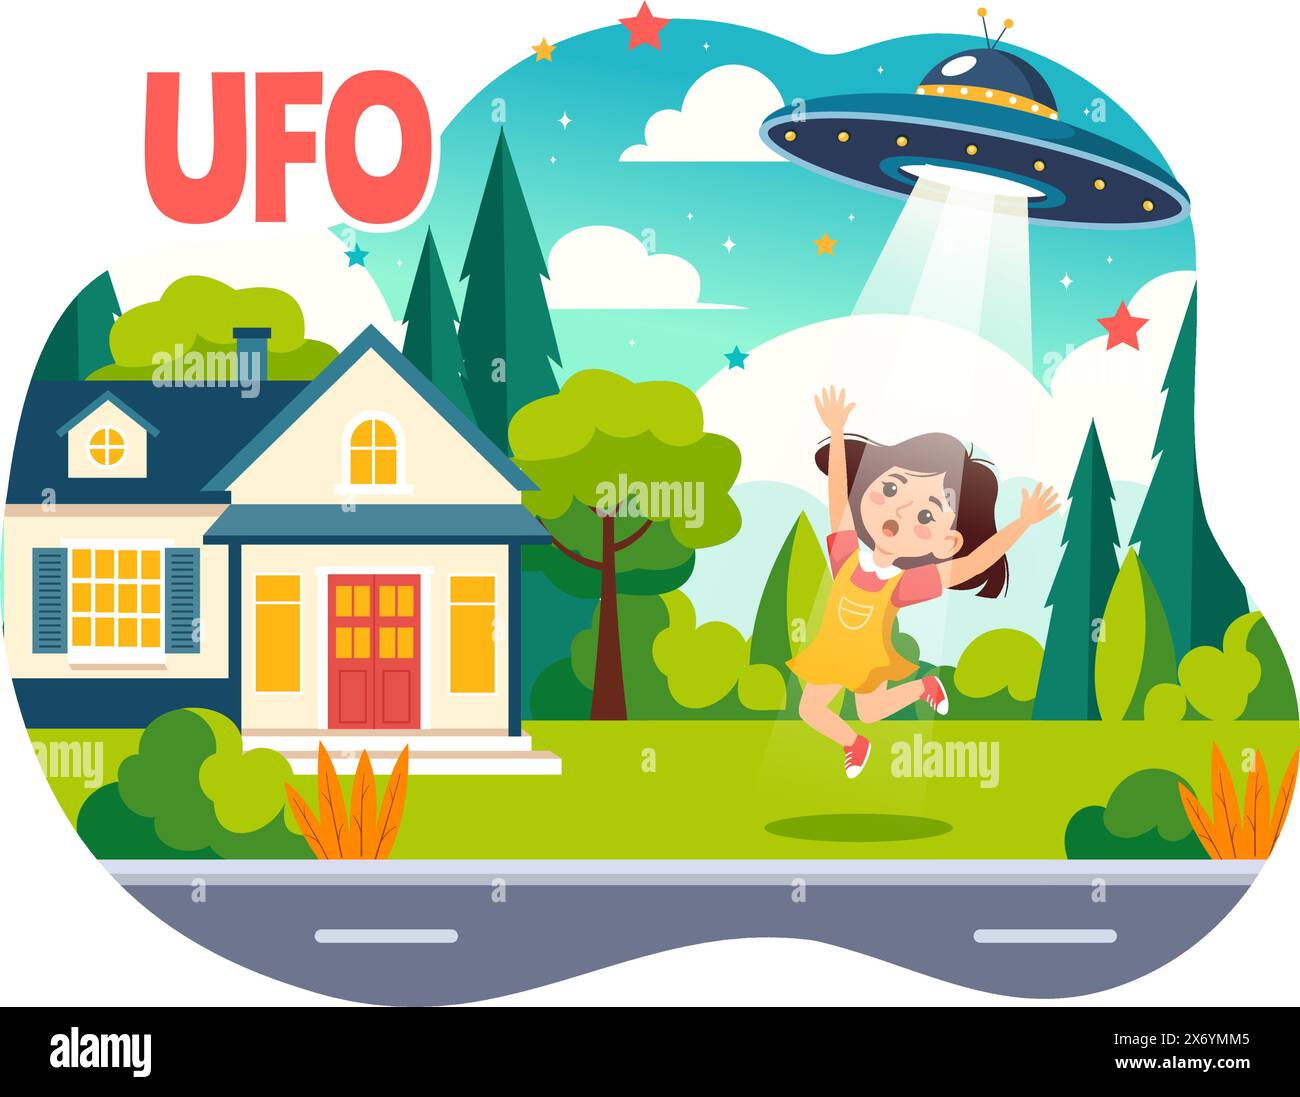 UFO Flying Spaceship Vector Illustration with Rays of Light in Sky Night City View, Abducts Human and Alien in Flat Kids Cartoon Background Design Stock Vector